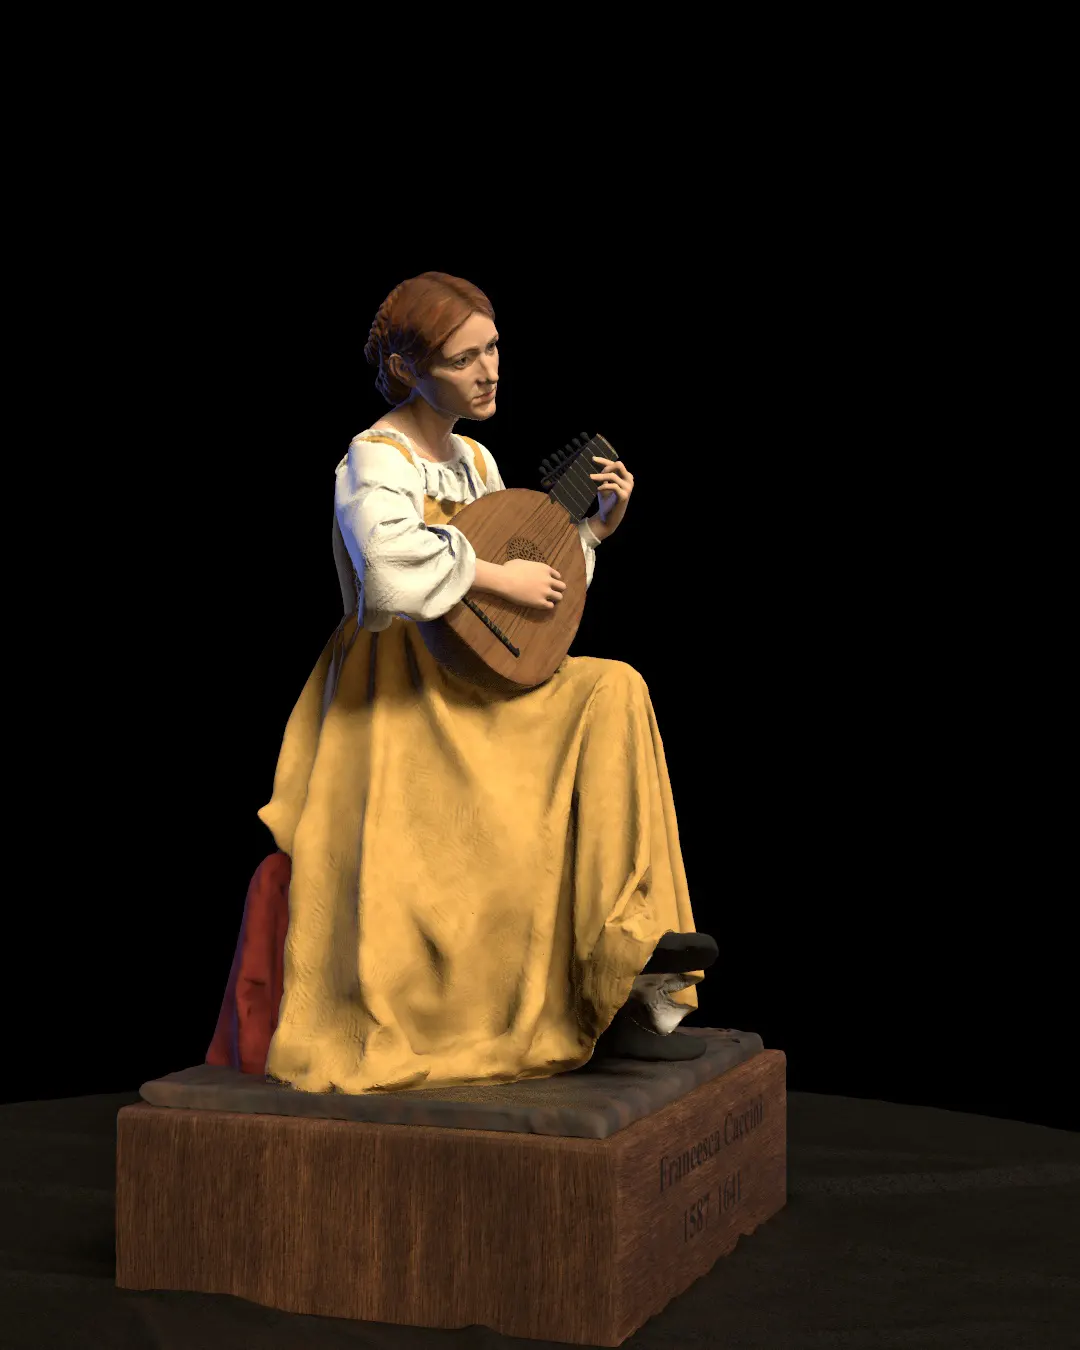 Francesca-Caccini-statue/Rendering-of-Francesca-Caccini-statue-modeled-by-Emil-Sole-2.webp